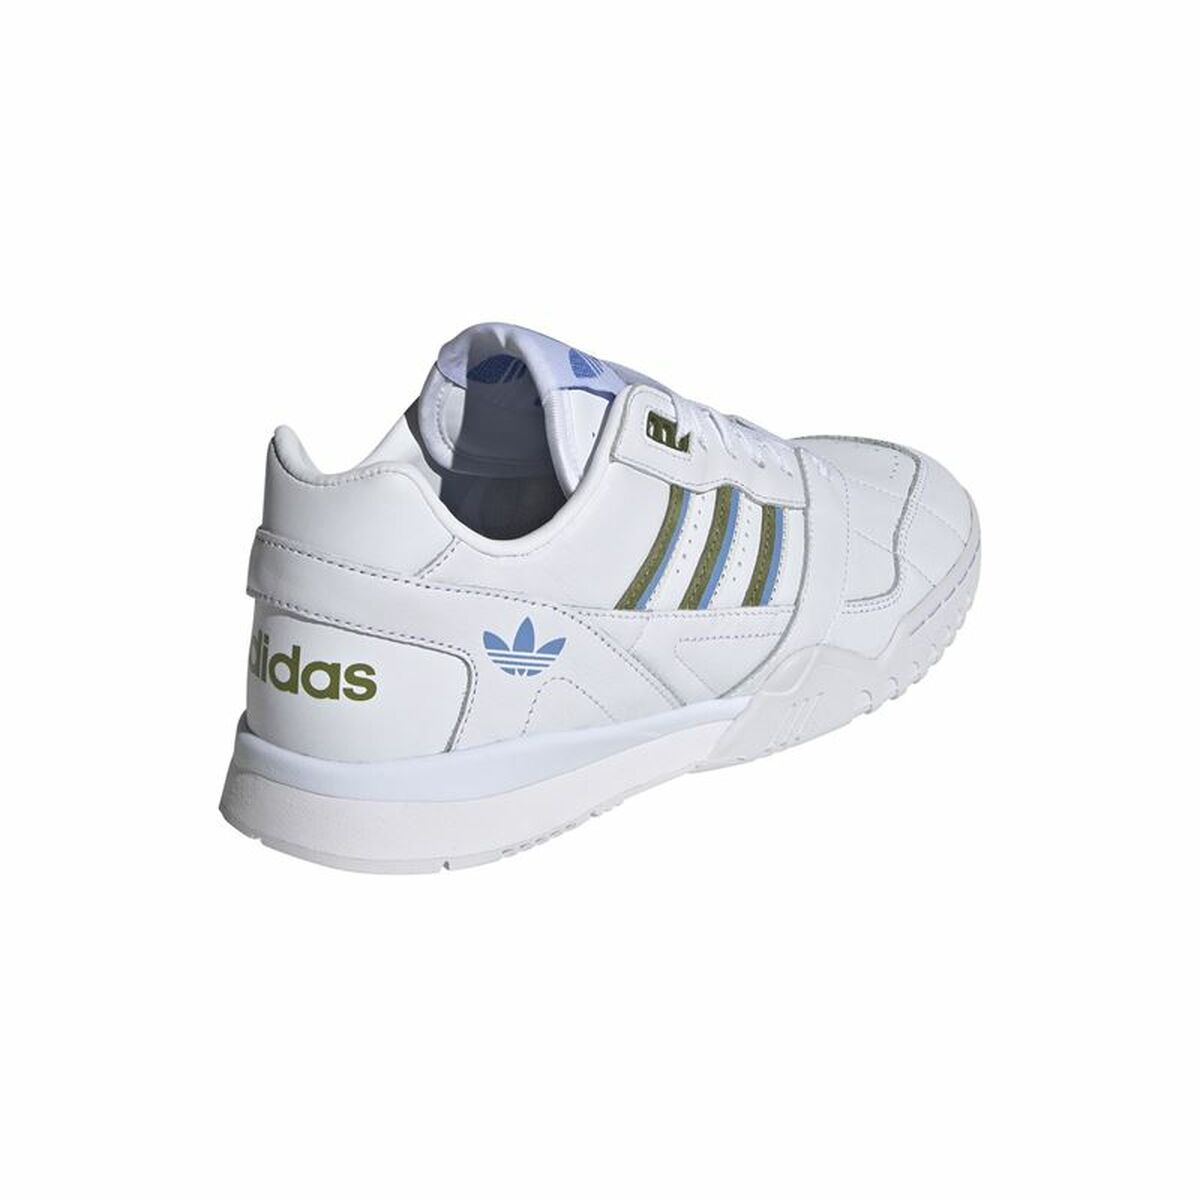 Sports Trainers for Women Adidas Originals A.R. Trainer White